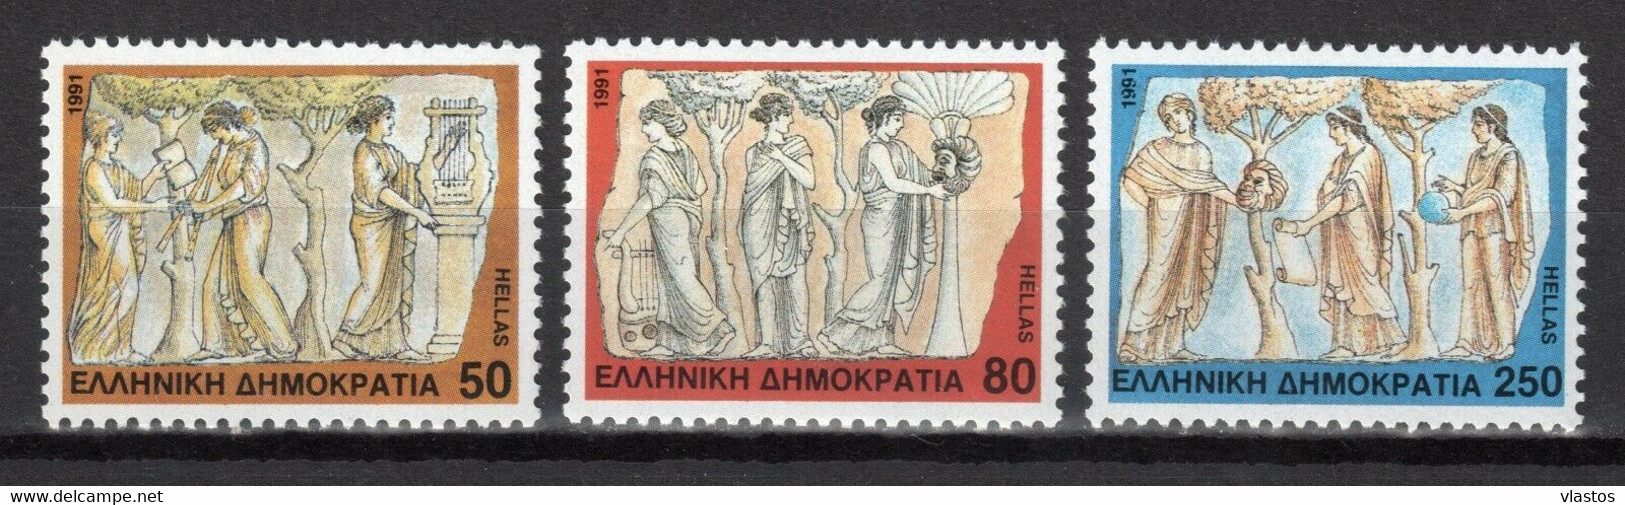 GREECE 1991 COMPLETE YEAR - PERFORATED + IMPERFORATE STAMPS MNH - Années Complètes